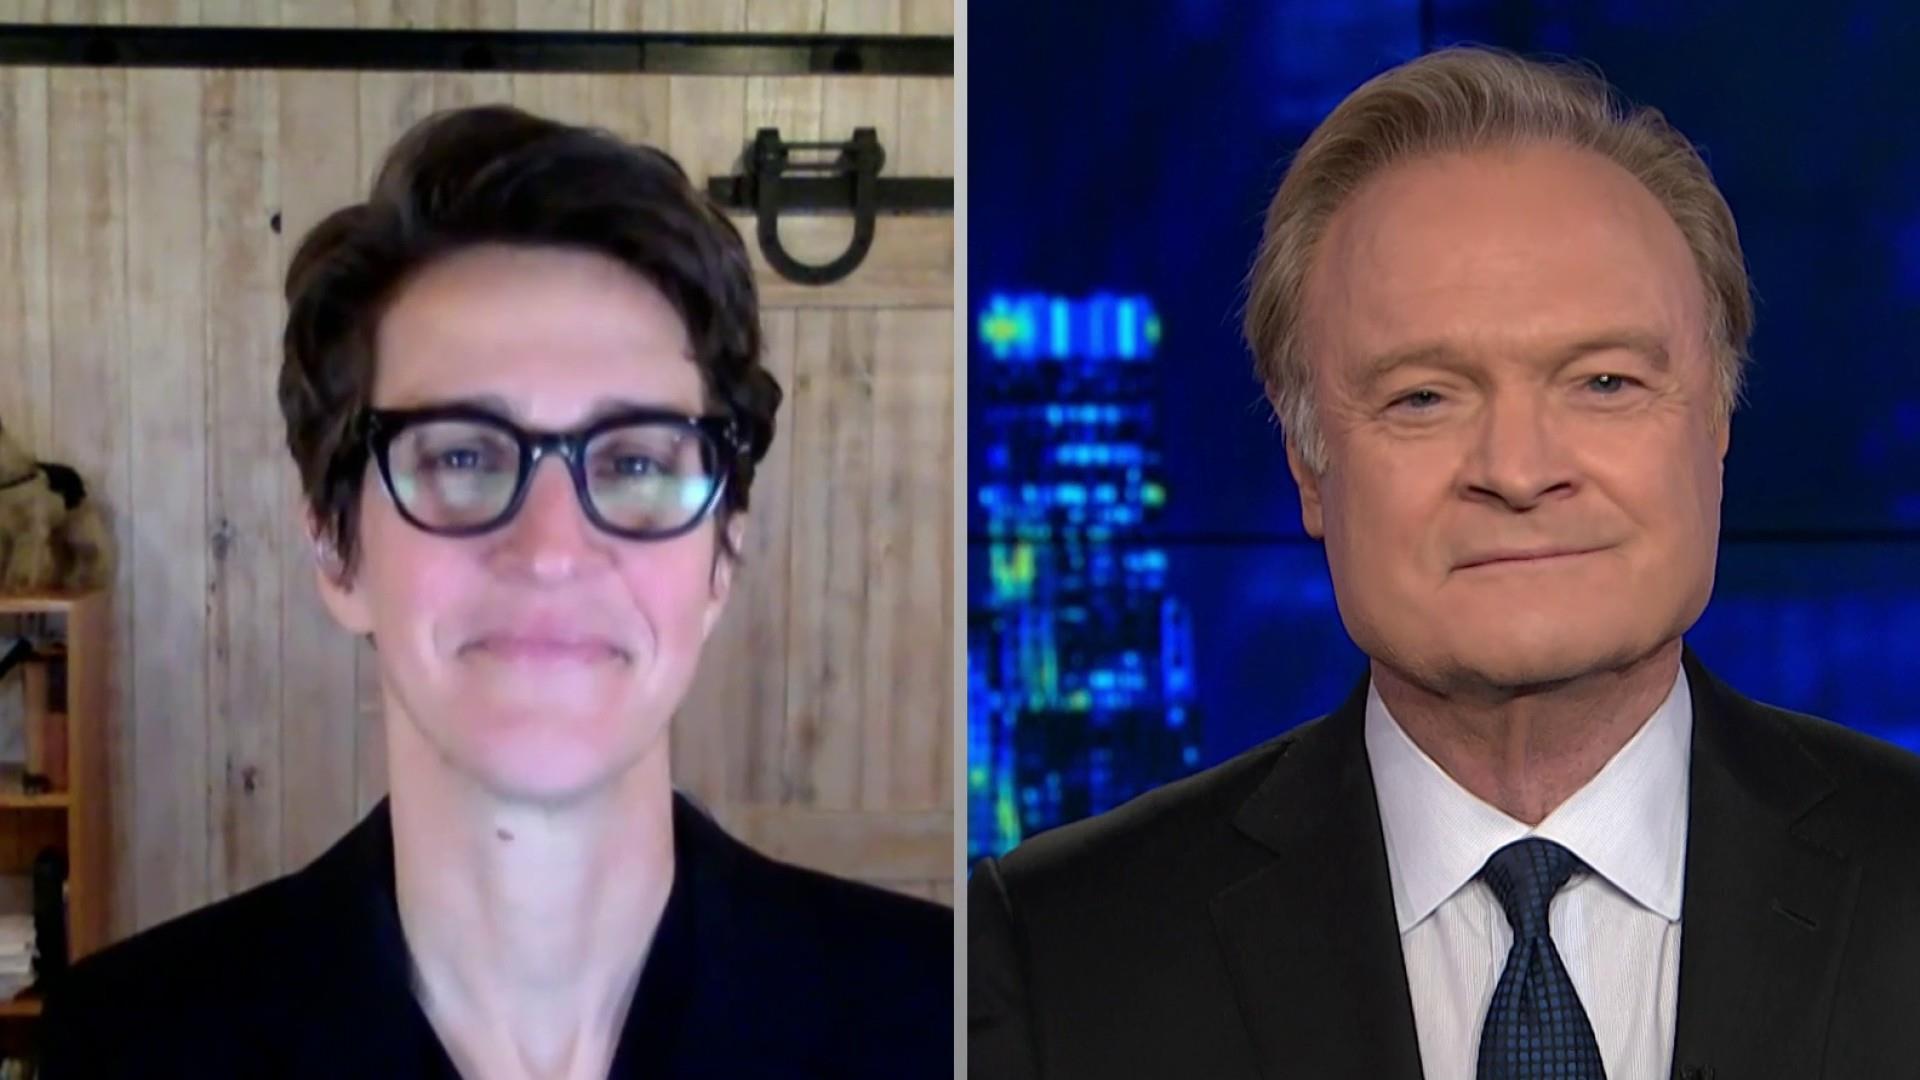 Lawrence O’Donnell thanks Rachel Maddow for her extraordinary Covid-19 message